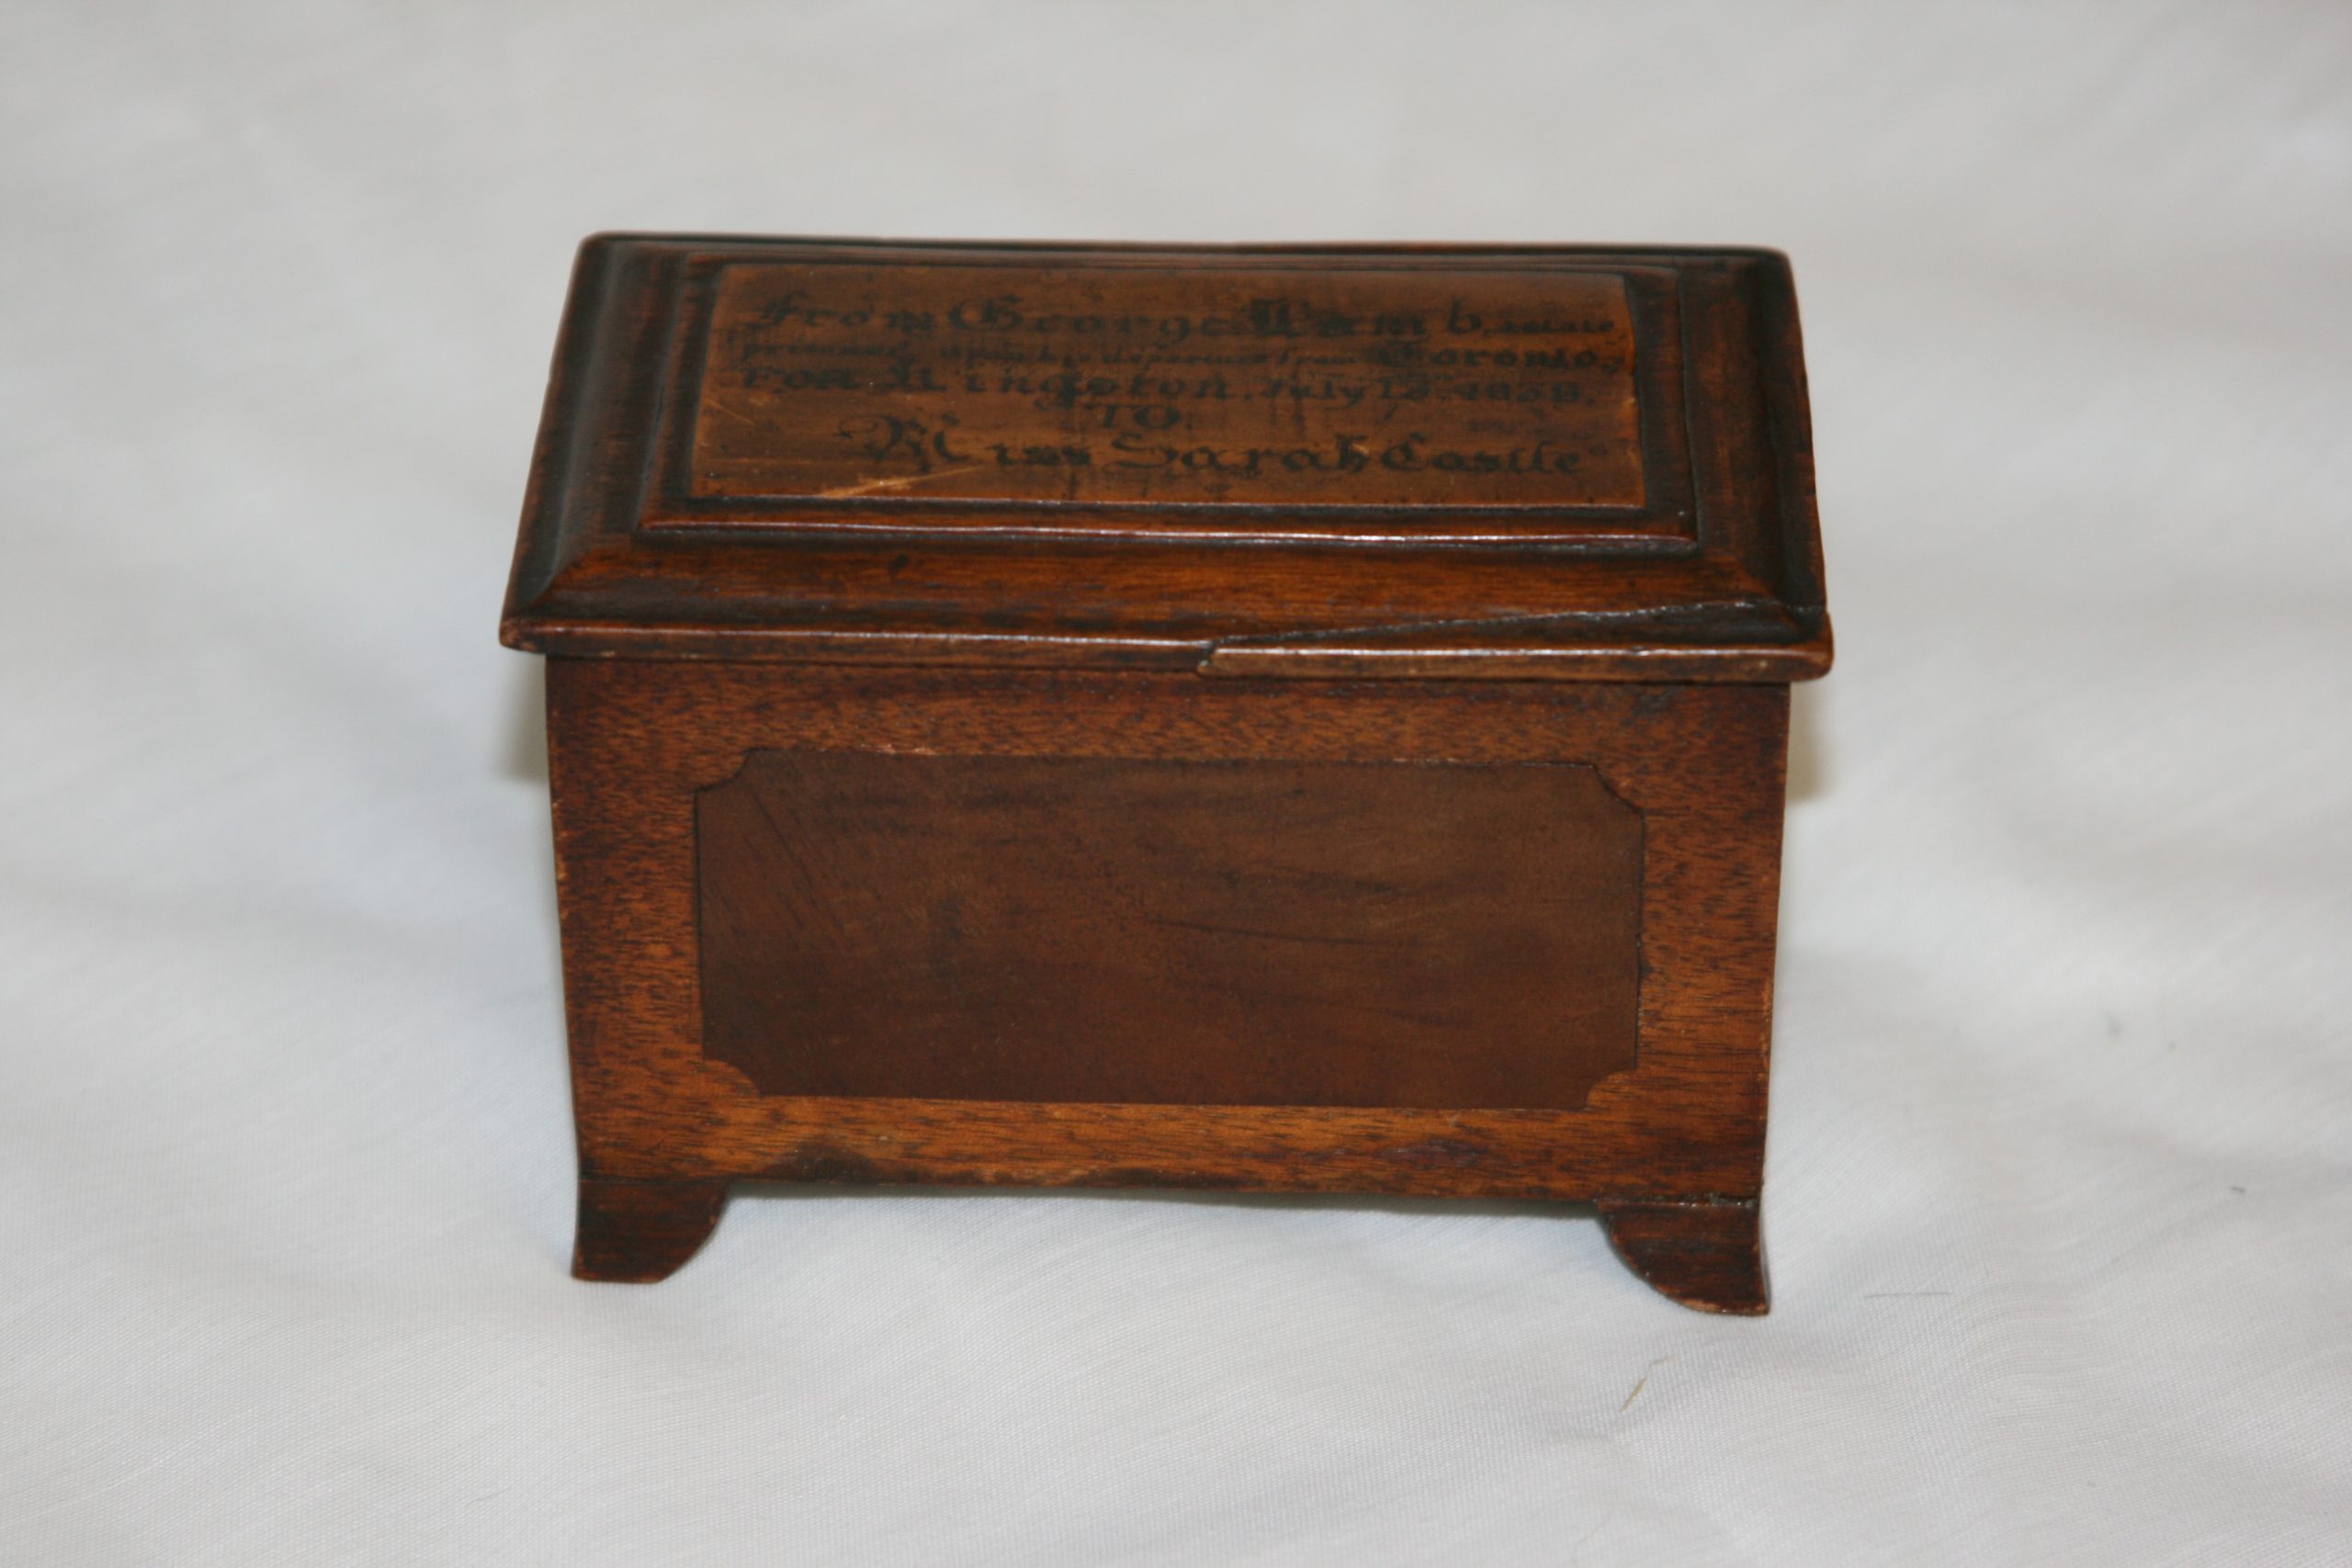 The largest rebellion box of the collection made by George Lambe for Miss Sarah Castle.